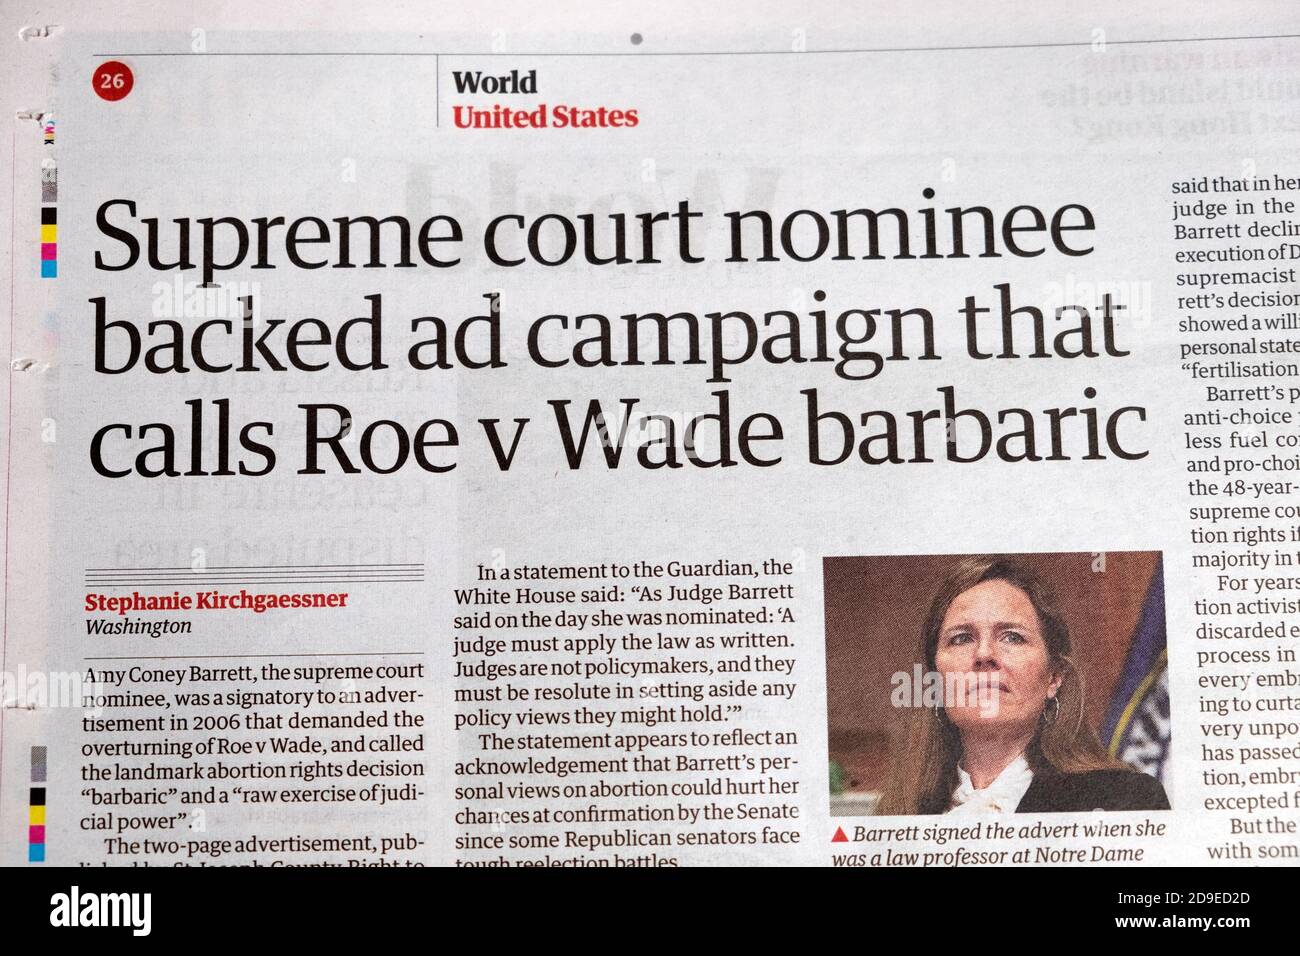 US 'Supreme court nominee backed ad campaign that calls Roe v Wade barbaric' Amy Coney Barrett Guardian newspaper headline 2 October 2020 in London Stock Photo